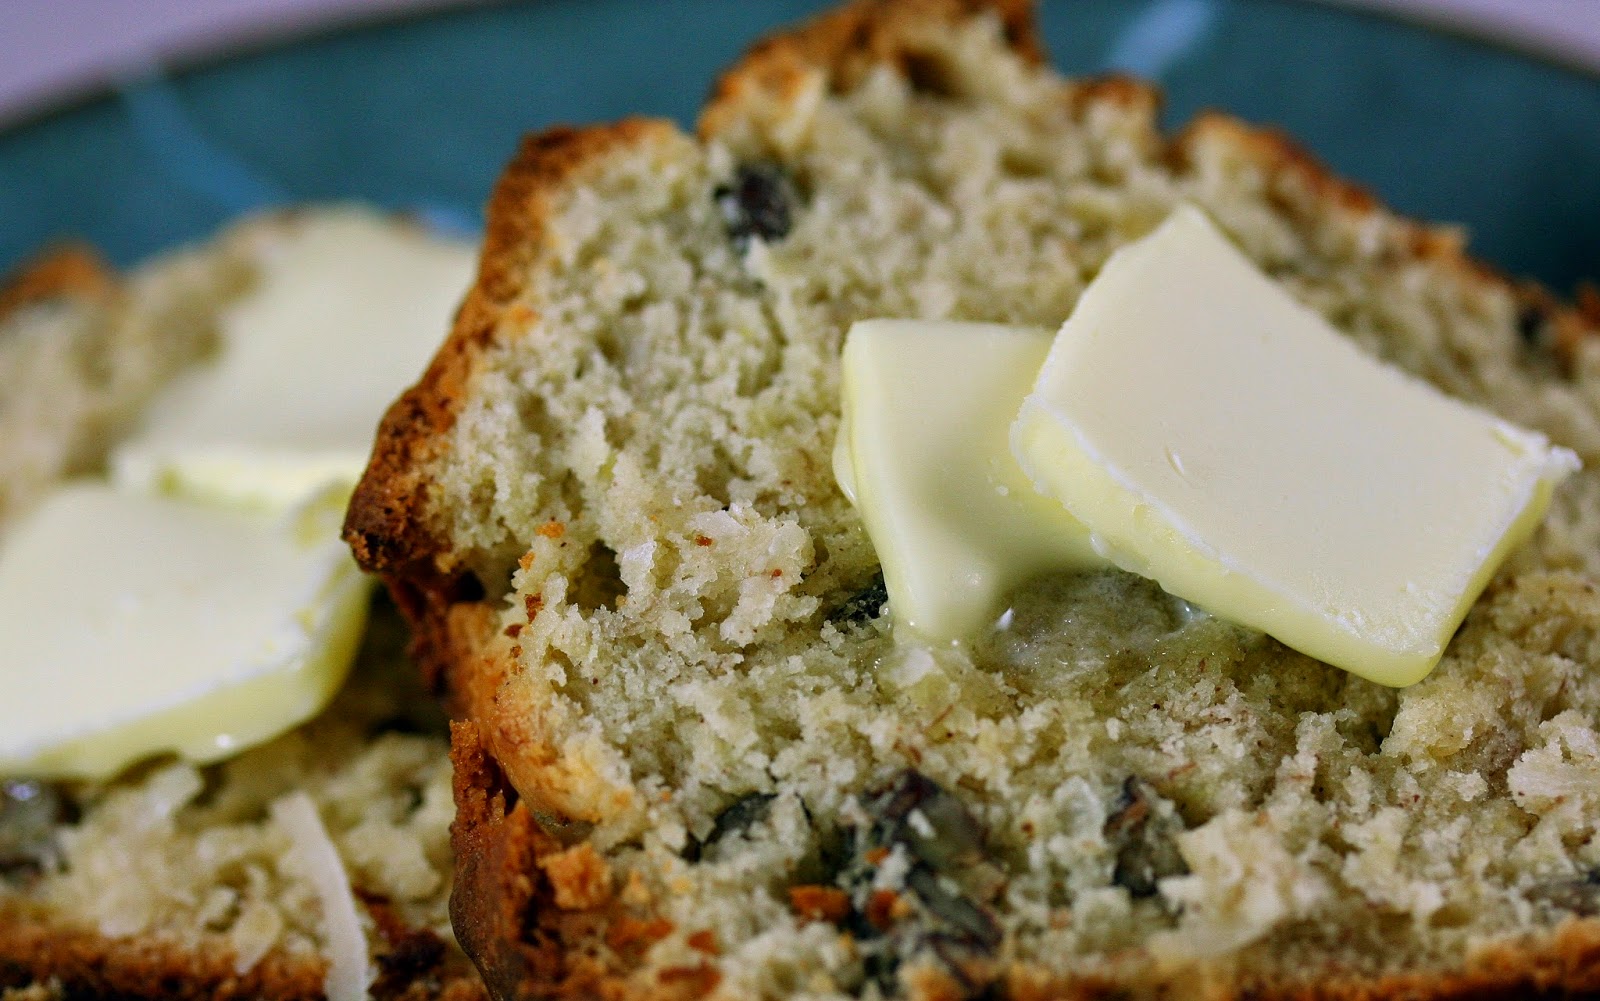 Culturally Confused: Southern Living: Cream Cheese-Banana-Nut Bread